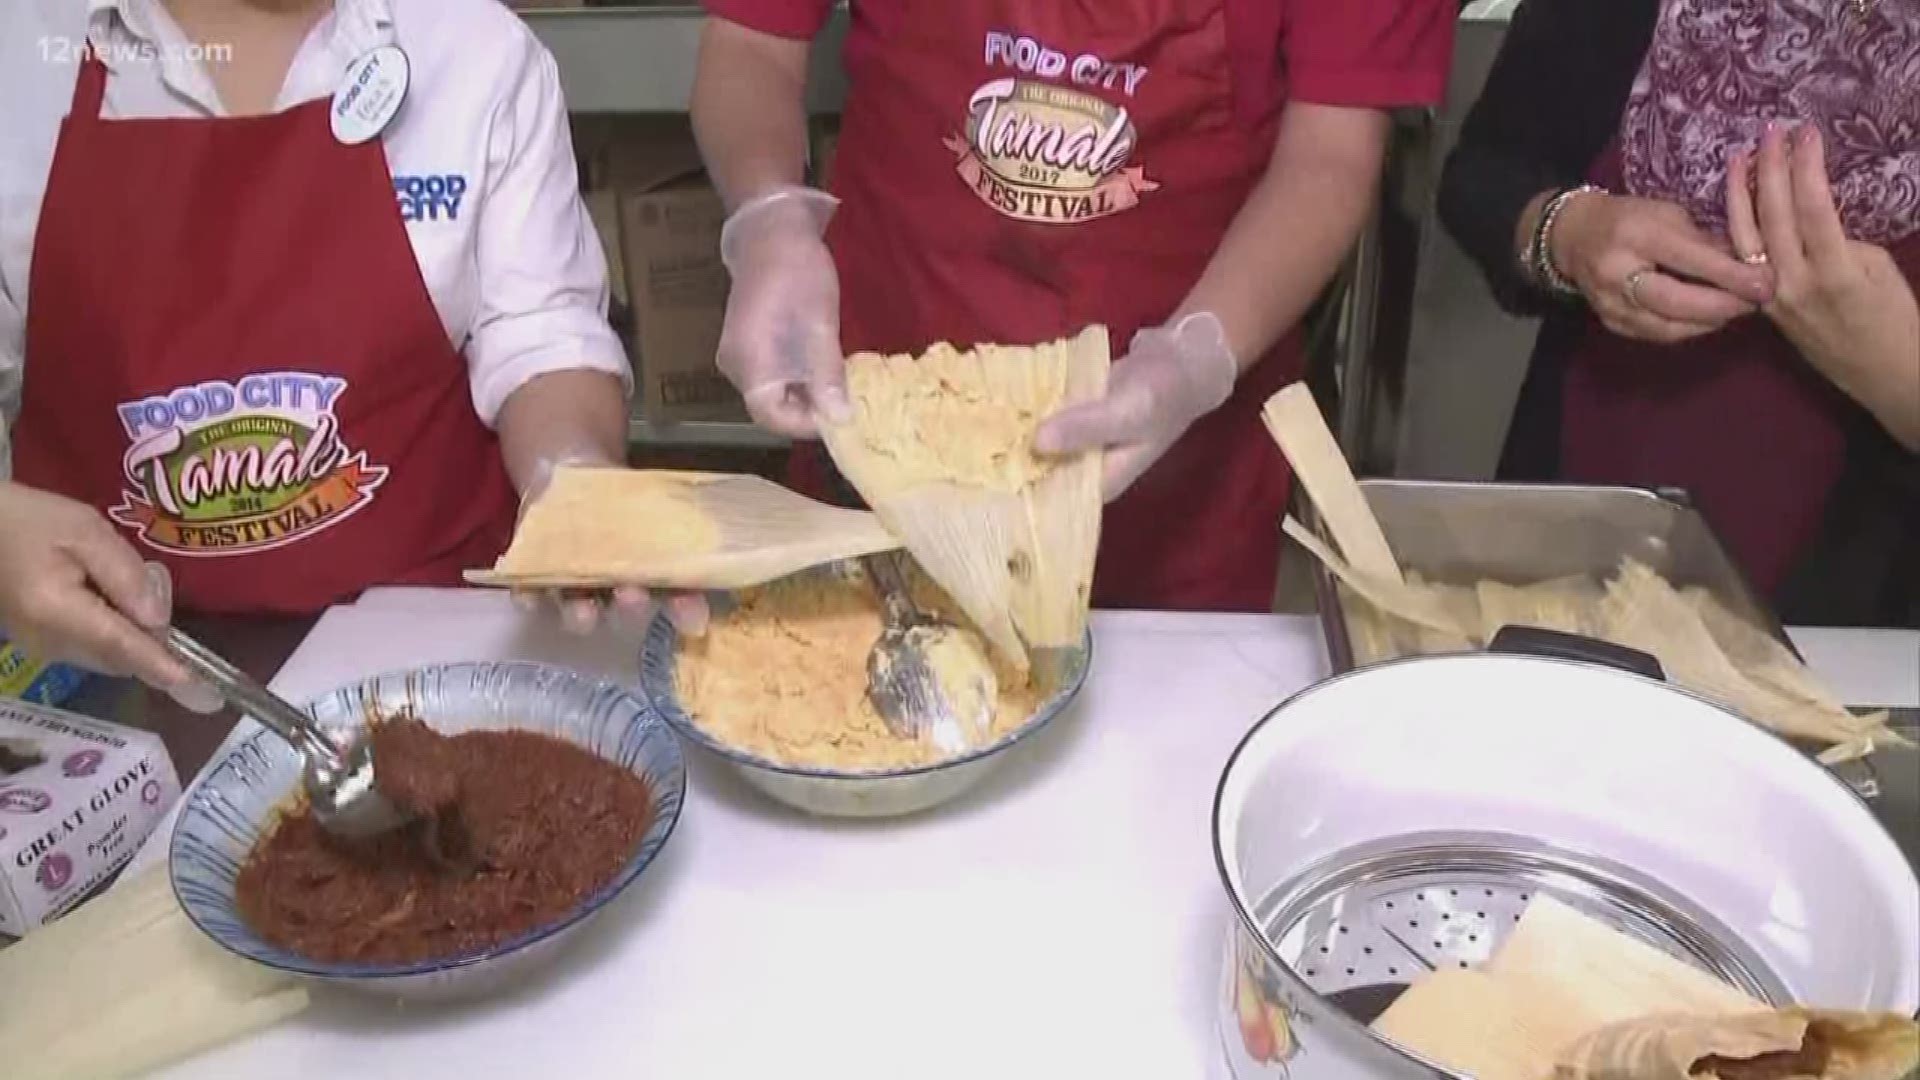 Food City Tamale Festival takes over downtown Phoenix this weekend